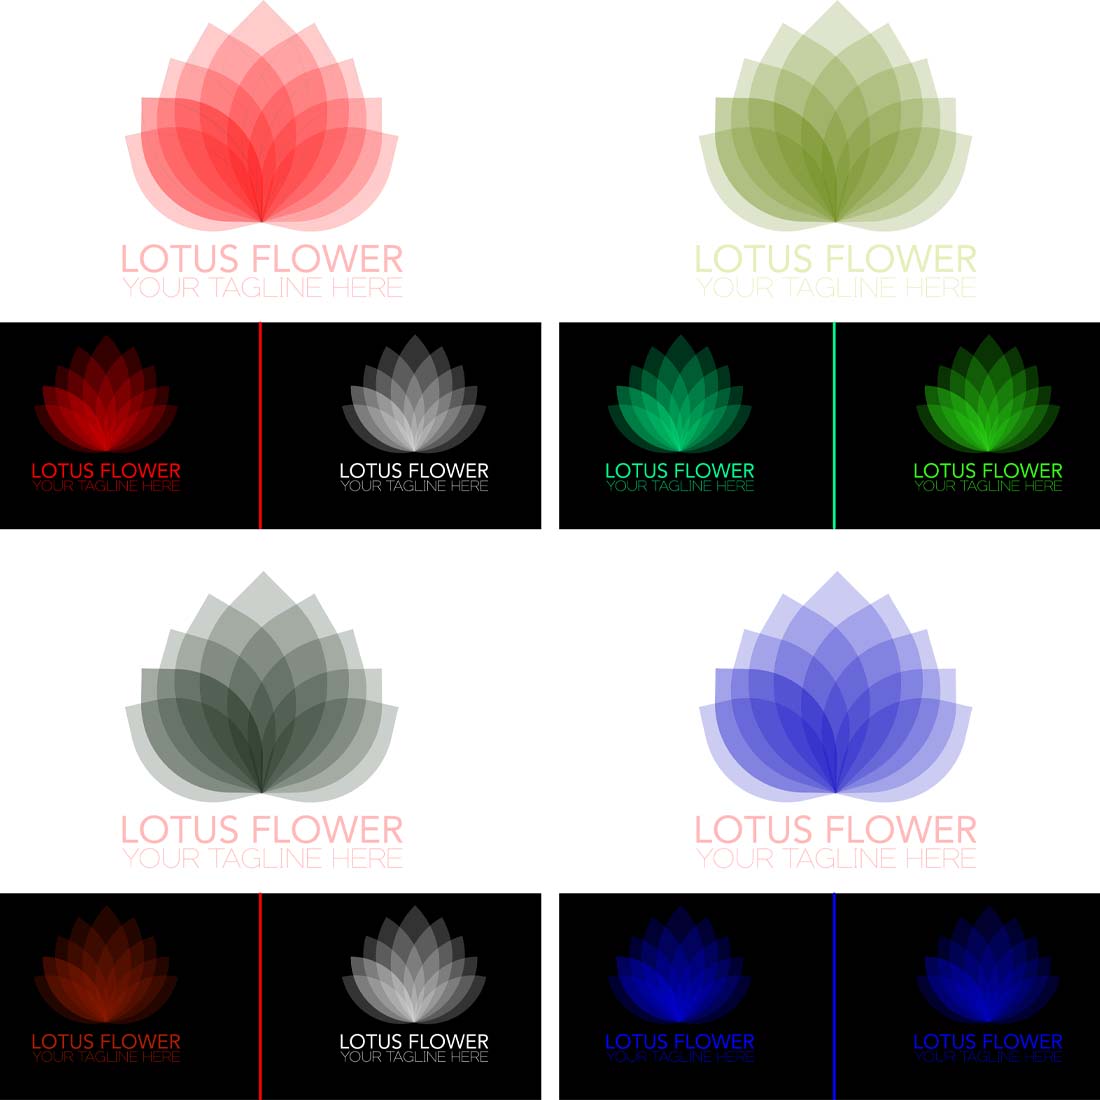 Lotus Flower Logo Collection cover image.